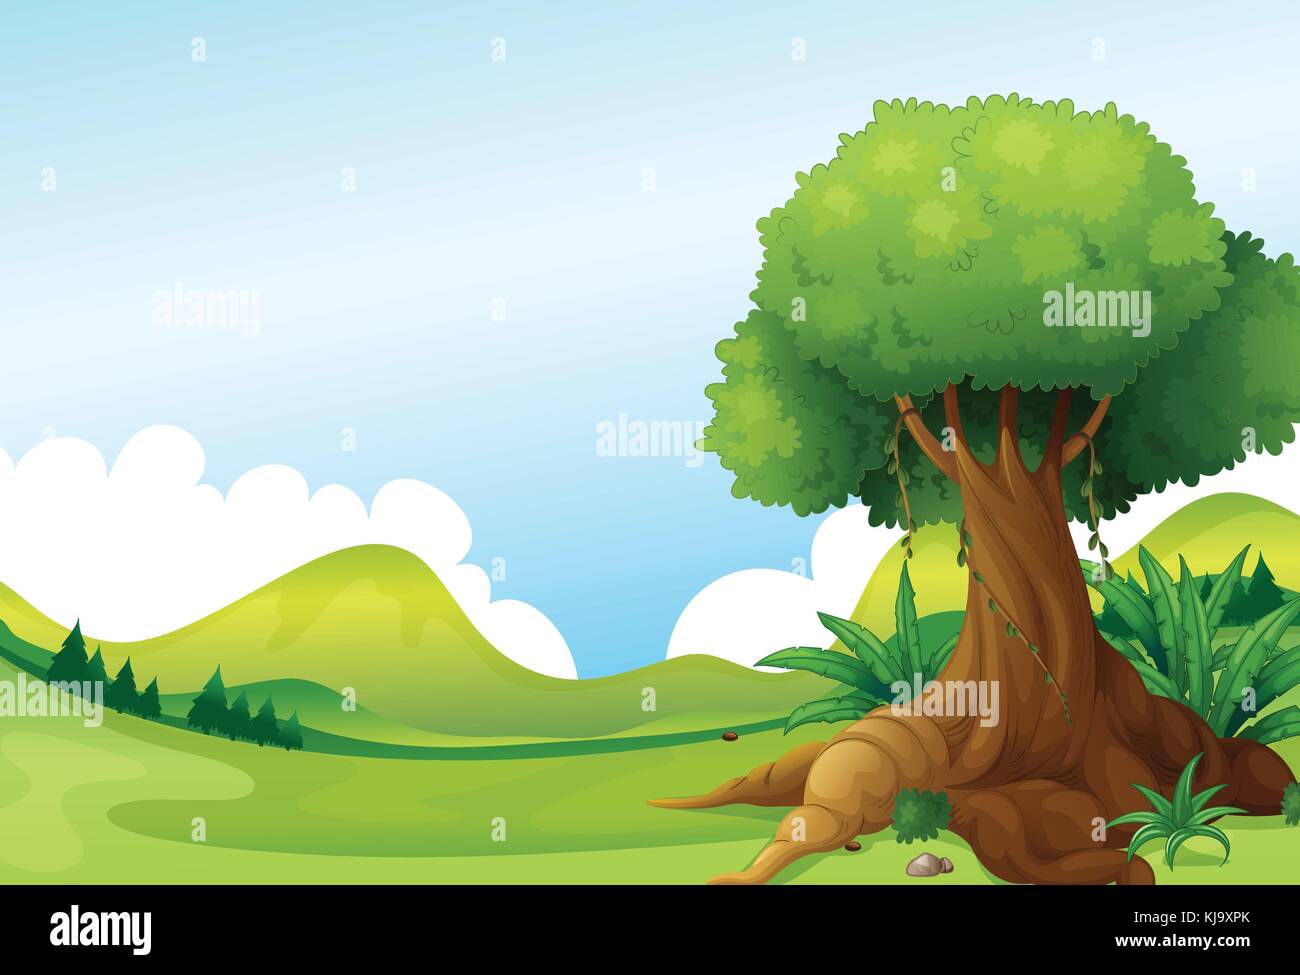 Illustration of a big tree with vine plants near the hills Stock Vector